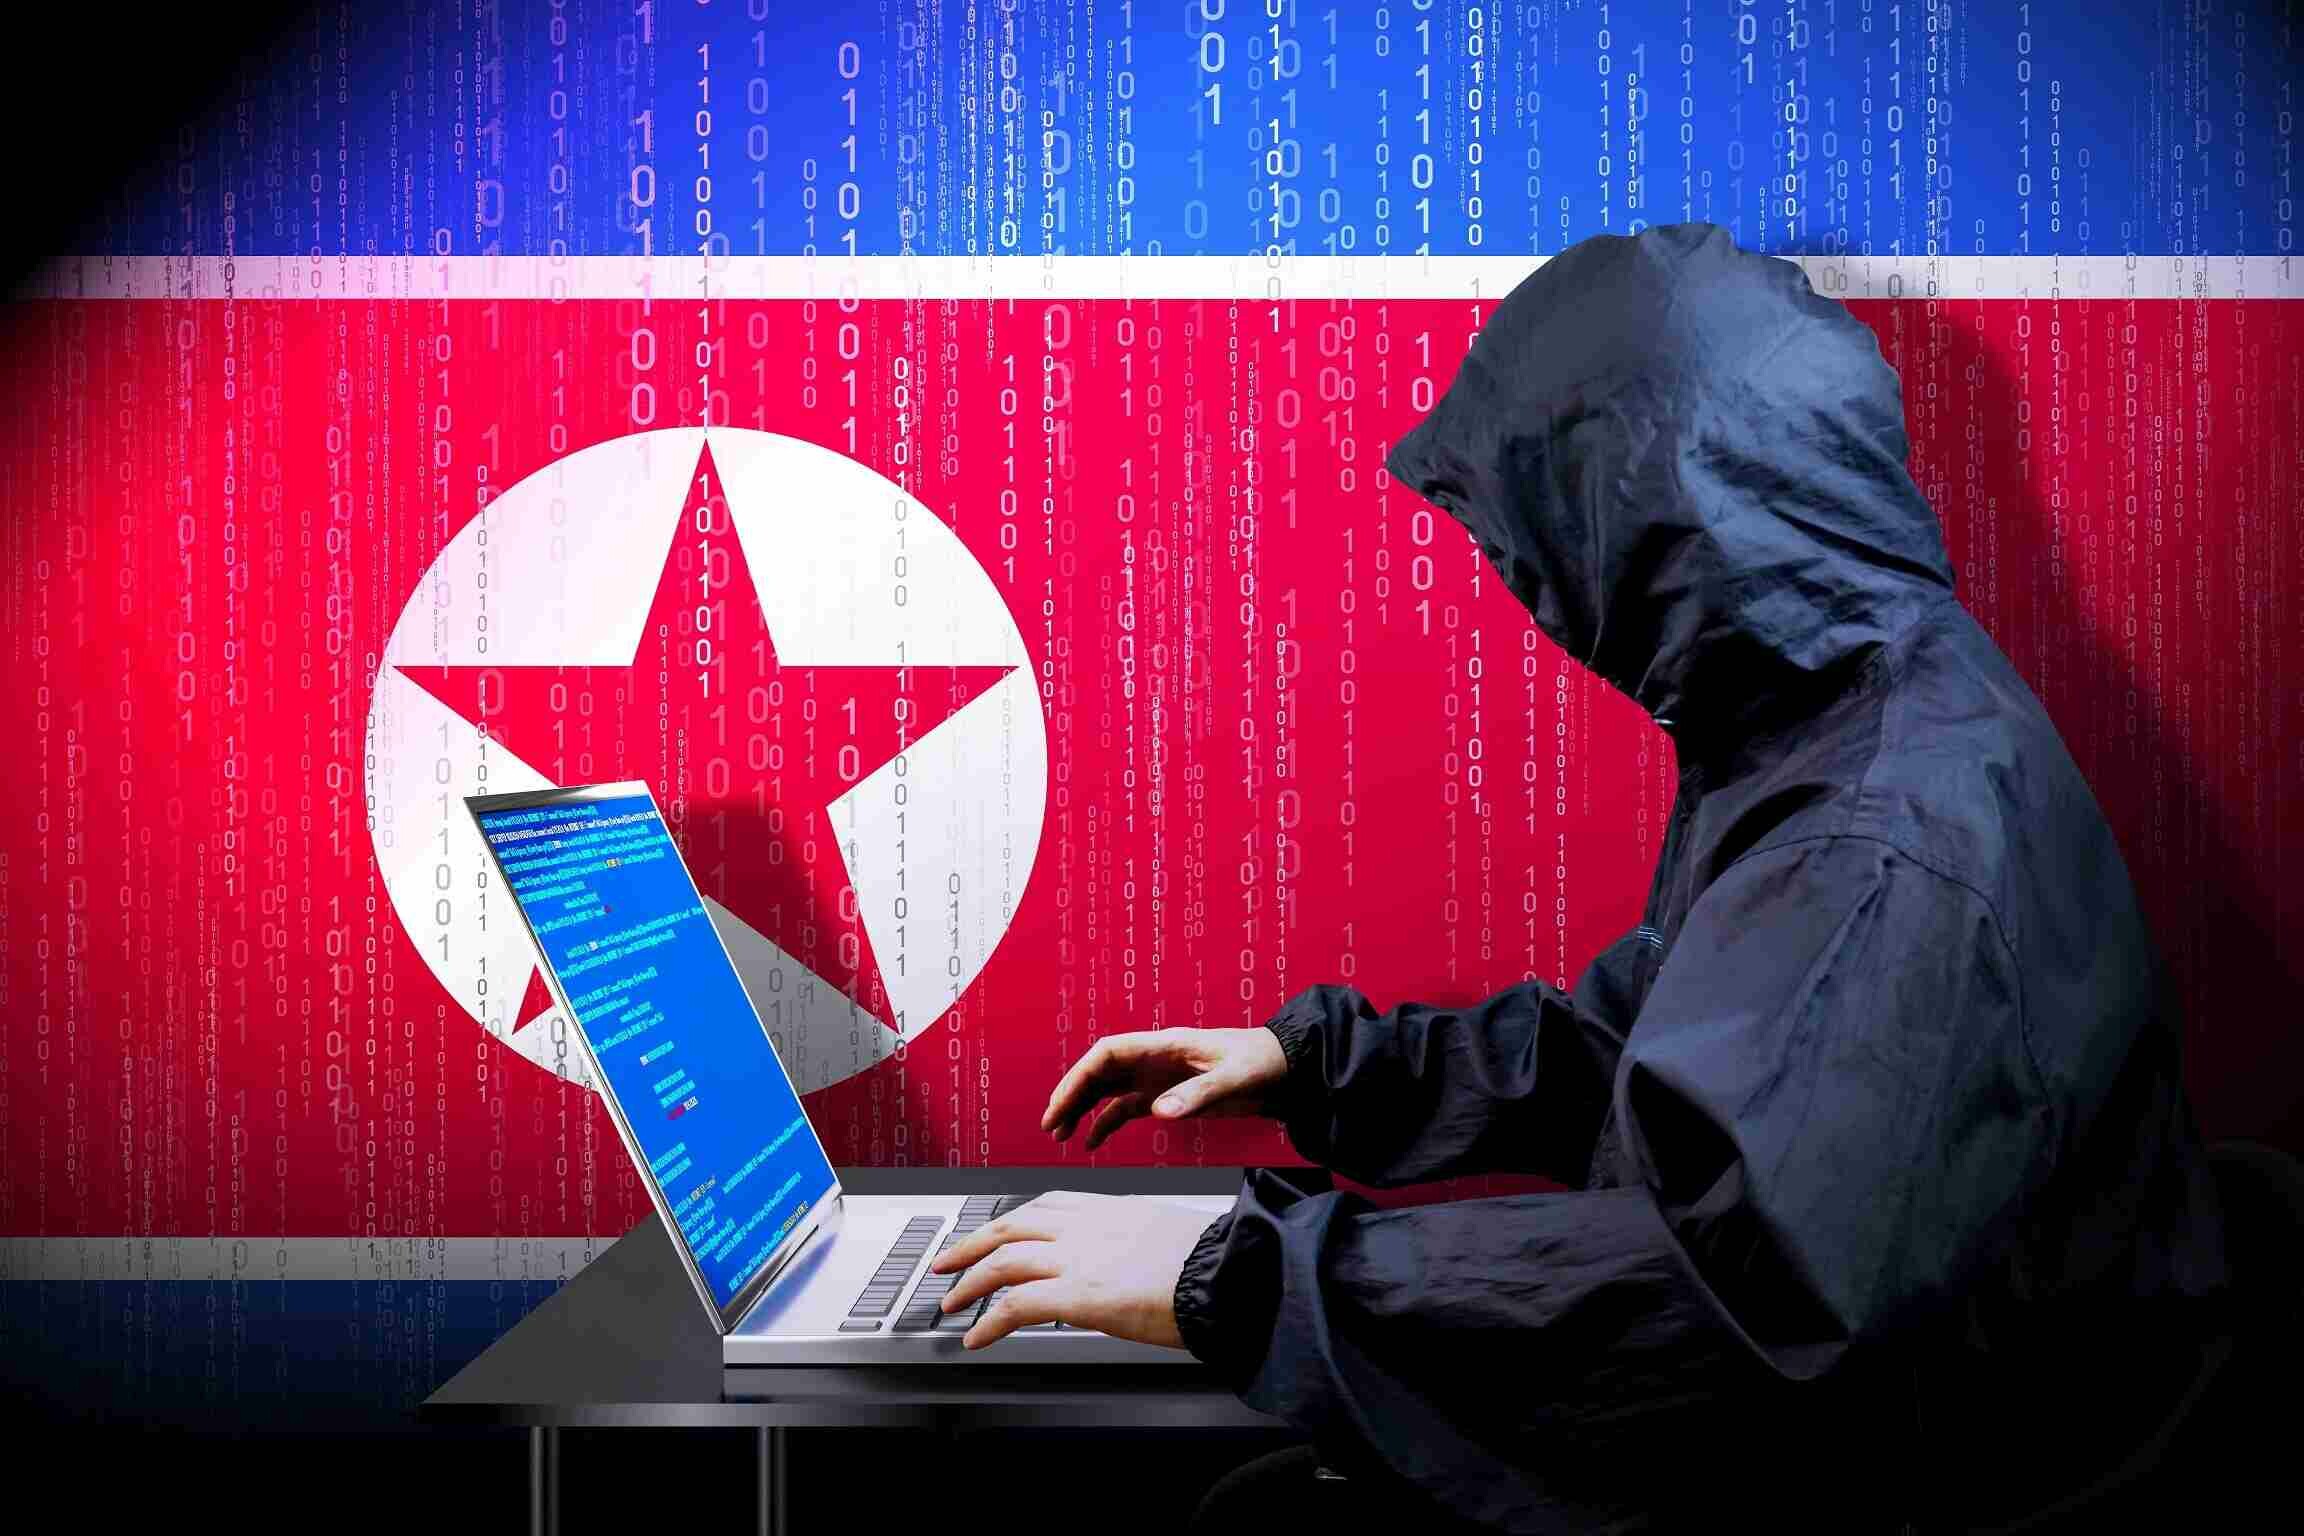 CRYPTONEWSBYTES.COM 7s-1-1 Russian and North Korean Cyberattack Infrastructure Converge: New Hacking Data Raises National Security Concerns  